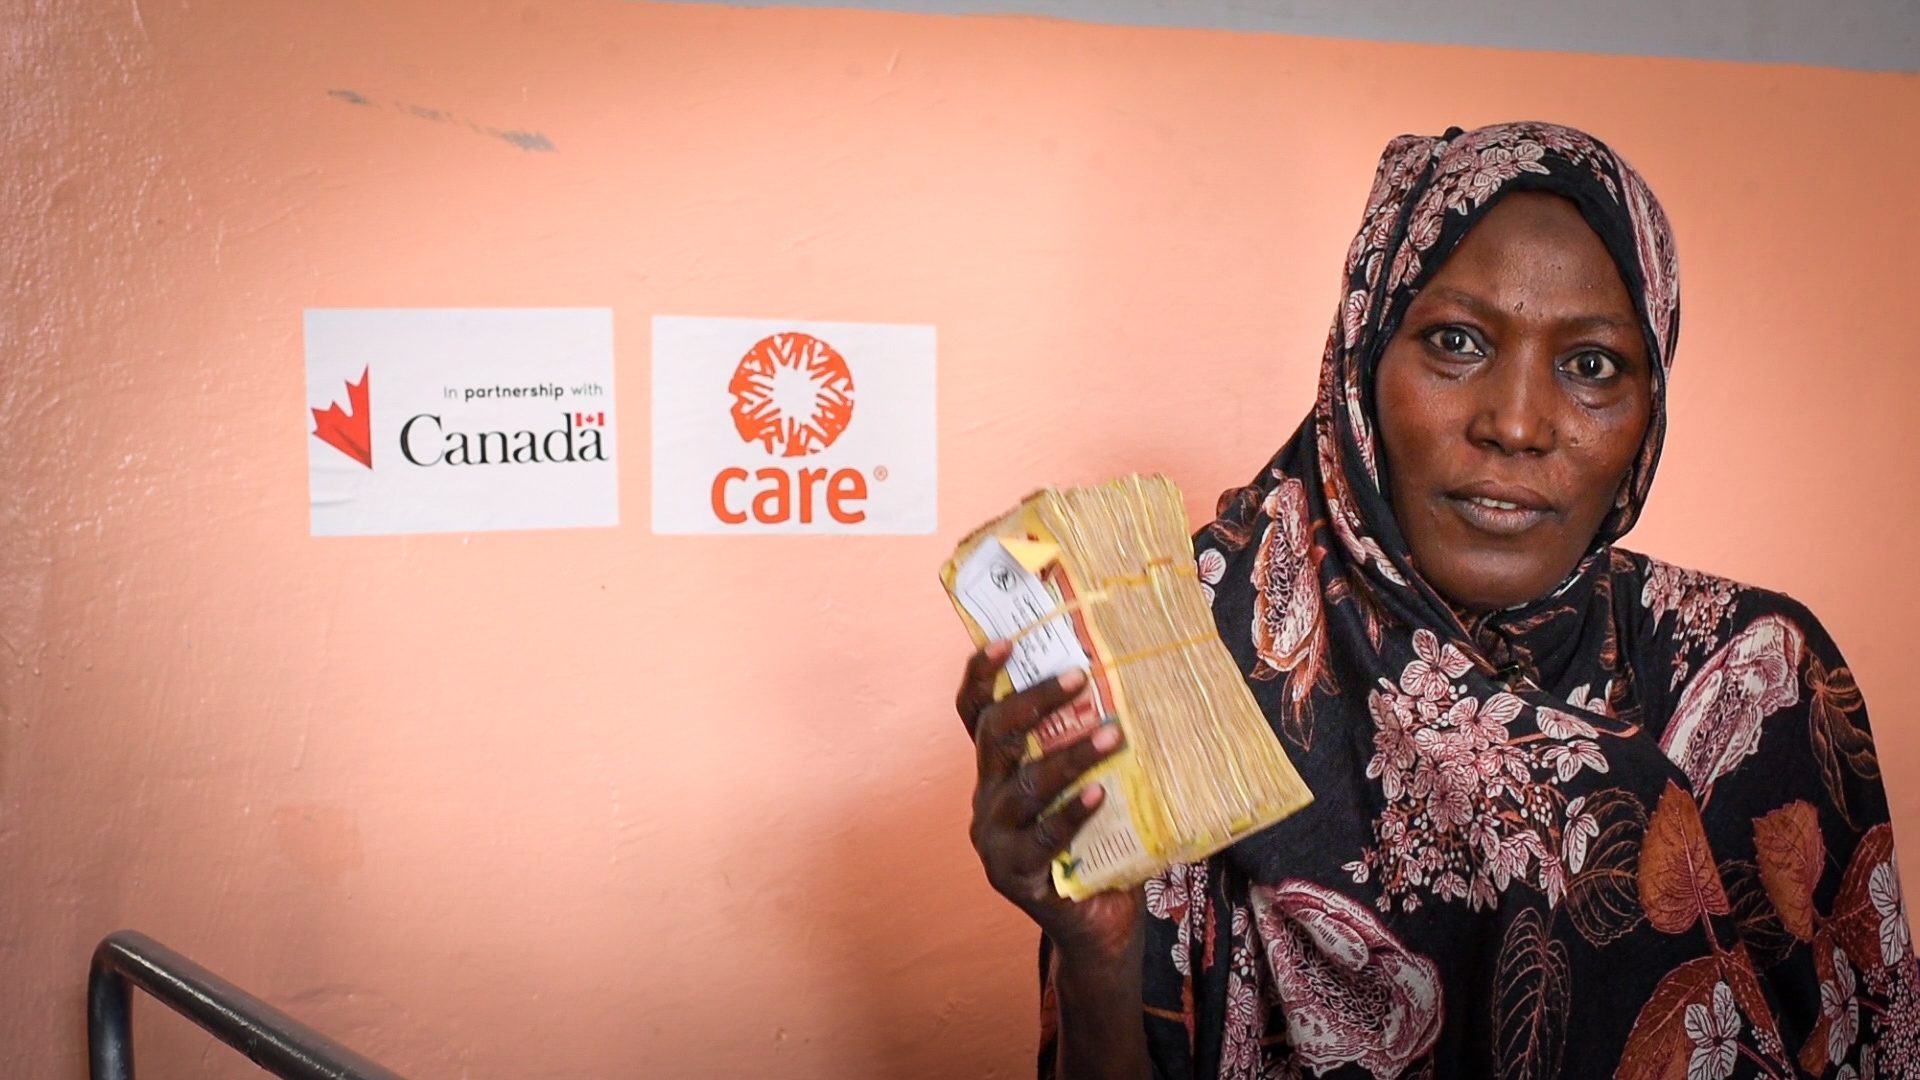 A woman holds a stack of money in one hand. She is standing in front of an orange wall with the CARE logo and the Government of Canada logo.